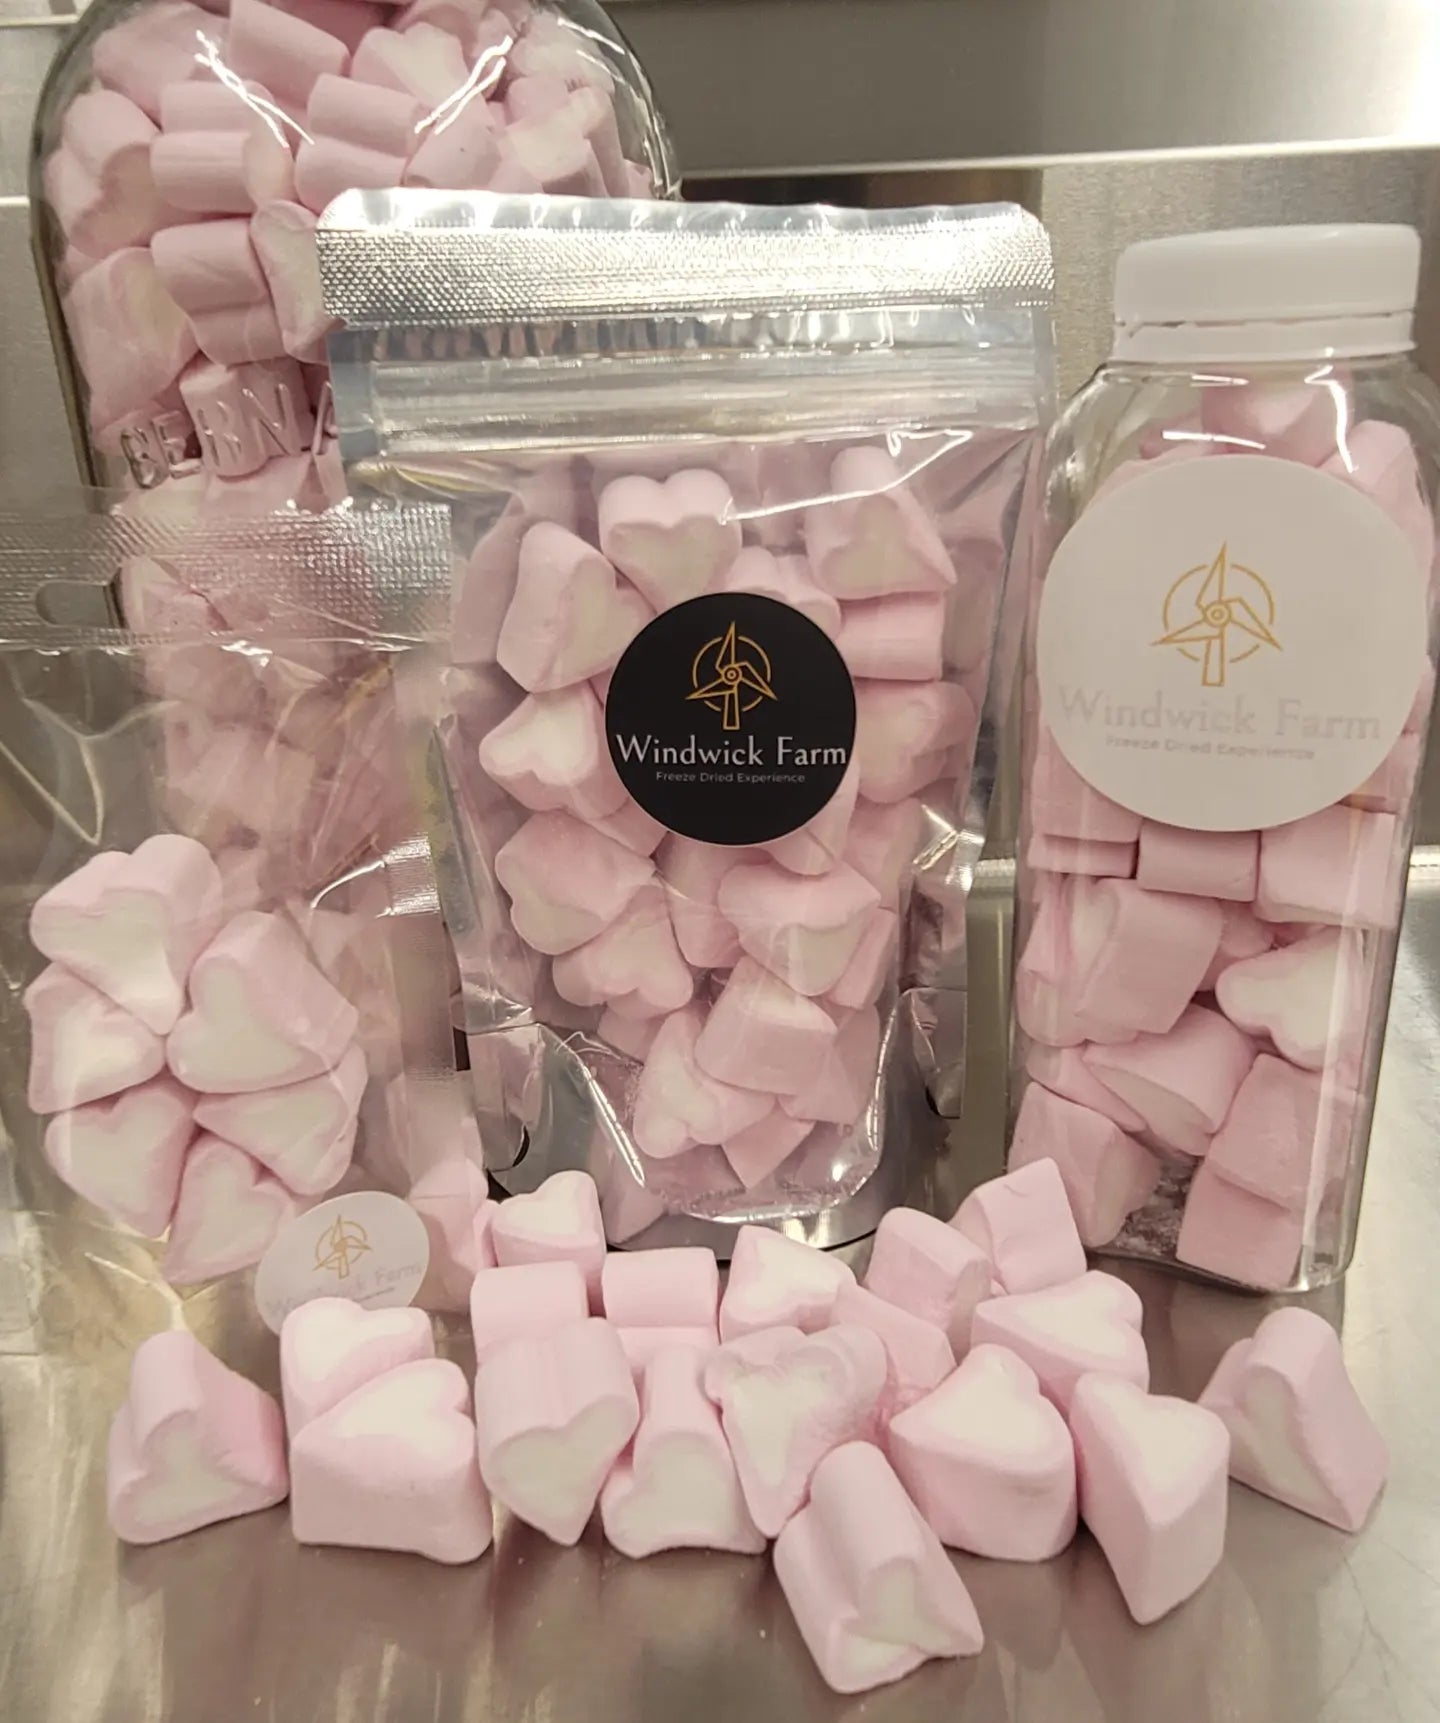 Freeze Dried Heart Shaped Marshmallows in a bottle